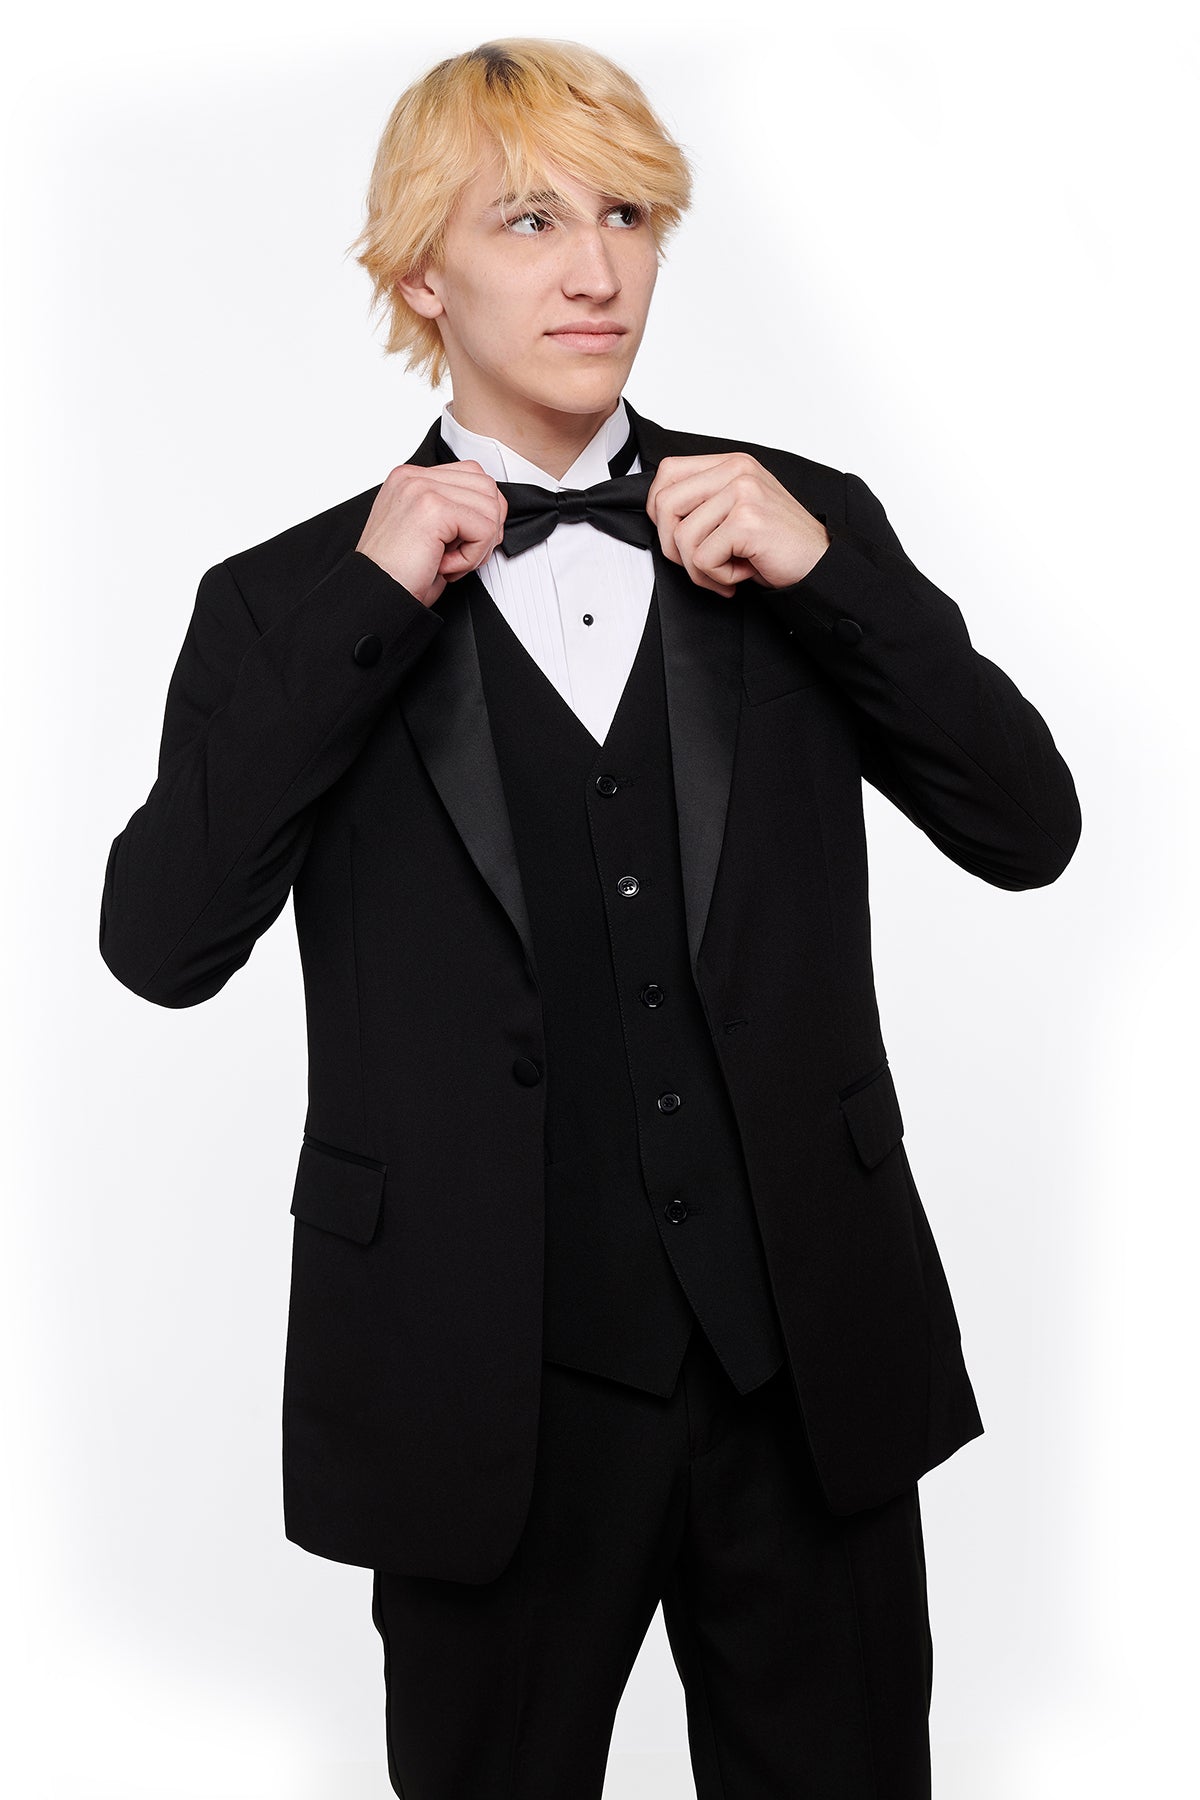 NATHAN (Style #3003) - Tuxedo Vest Package